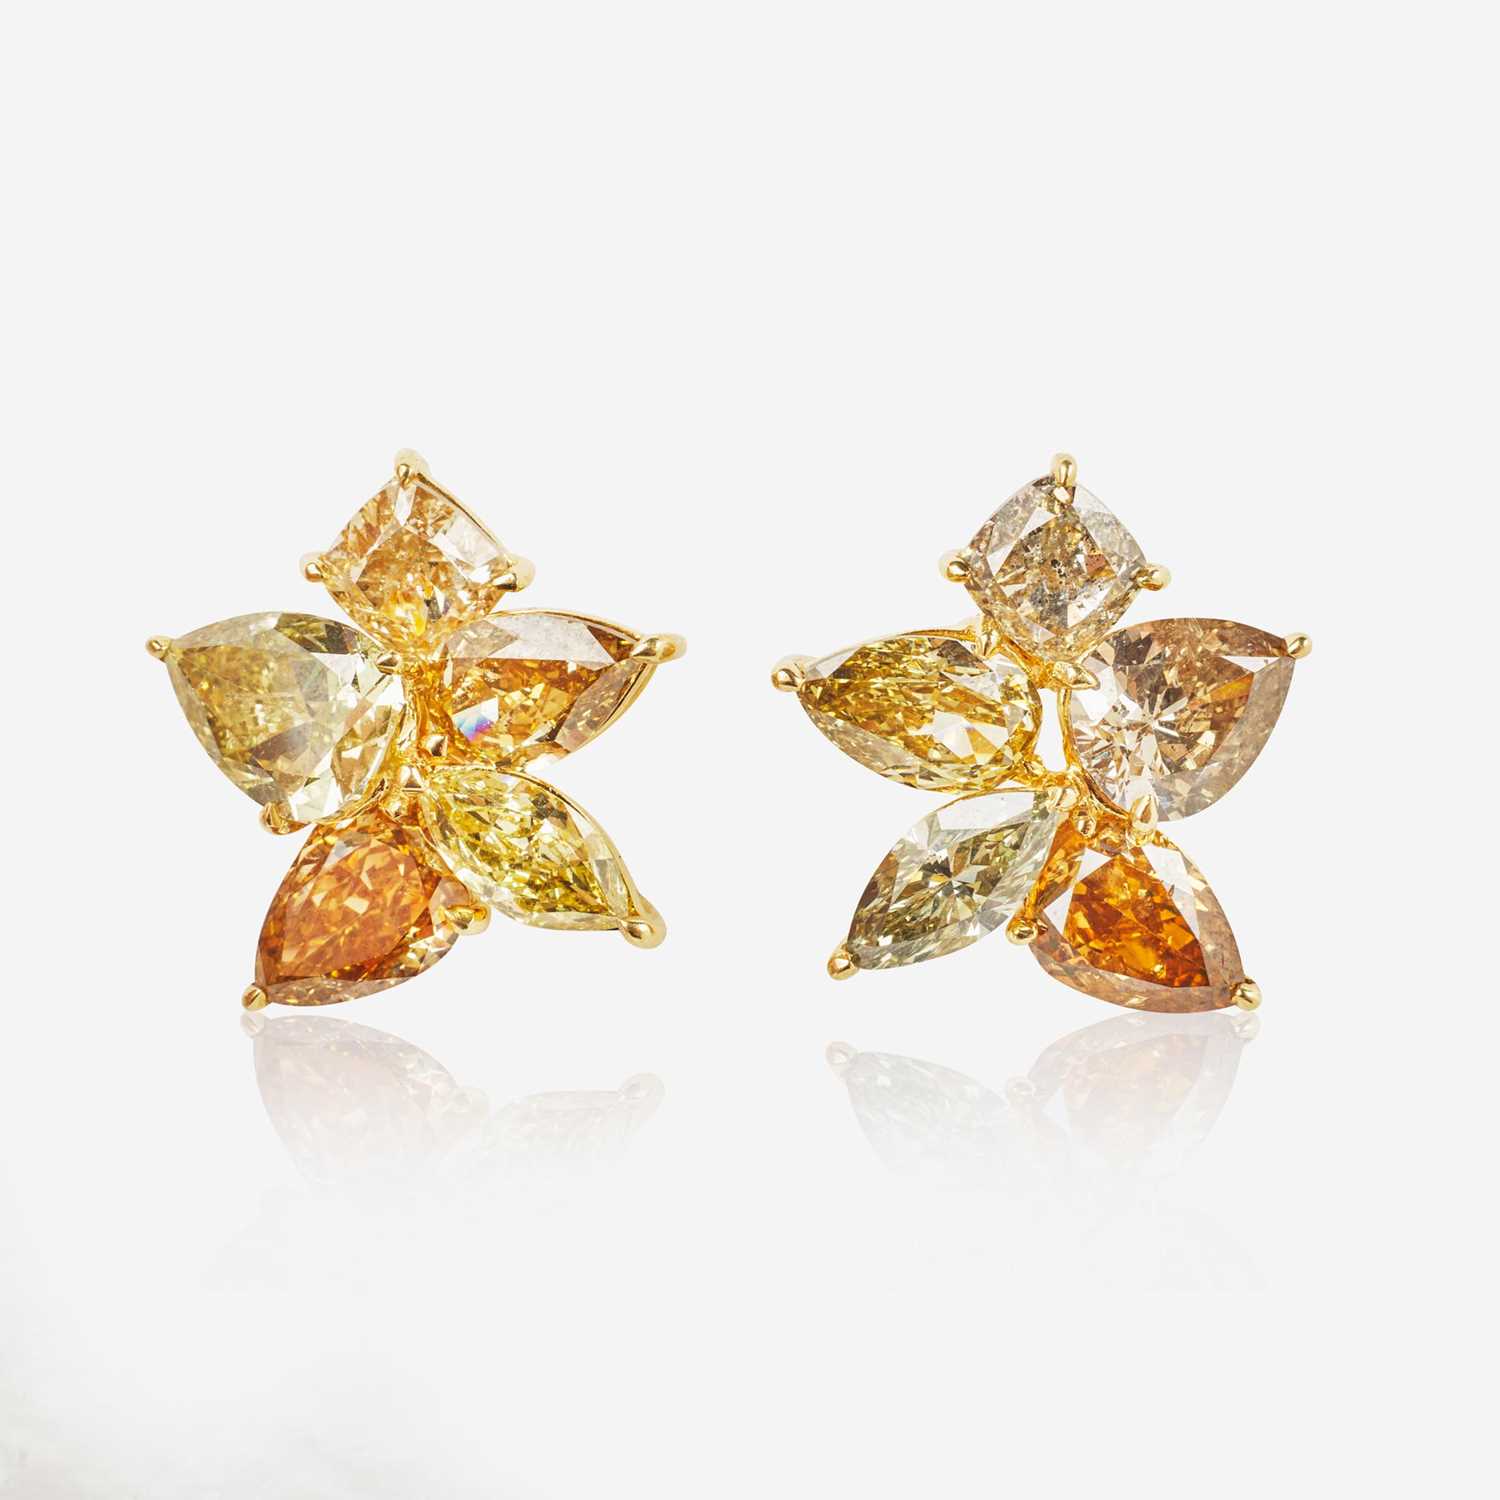 Lot 14 - A Pair of 18K Yellow Gold and Diamond Earrings